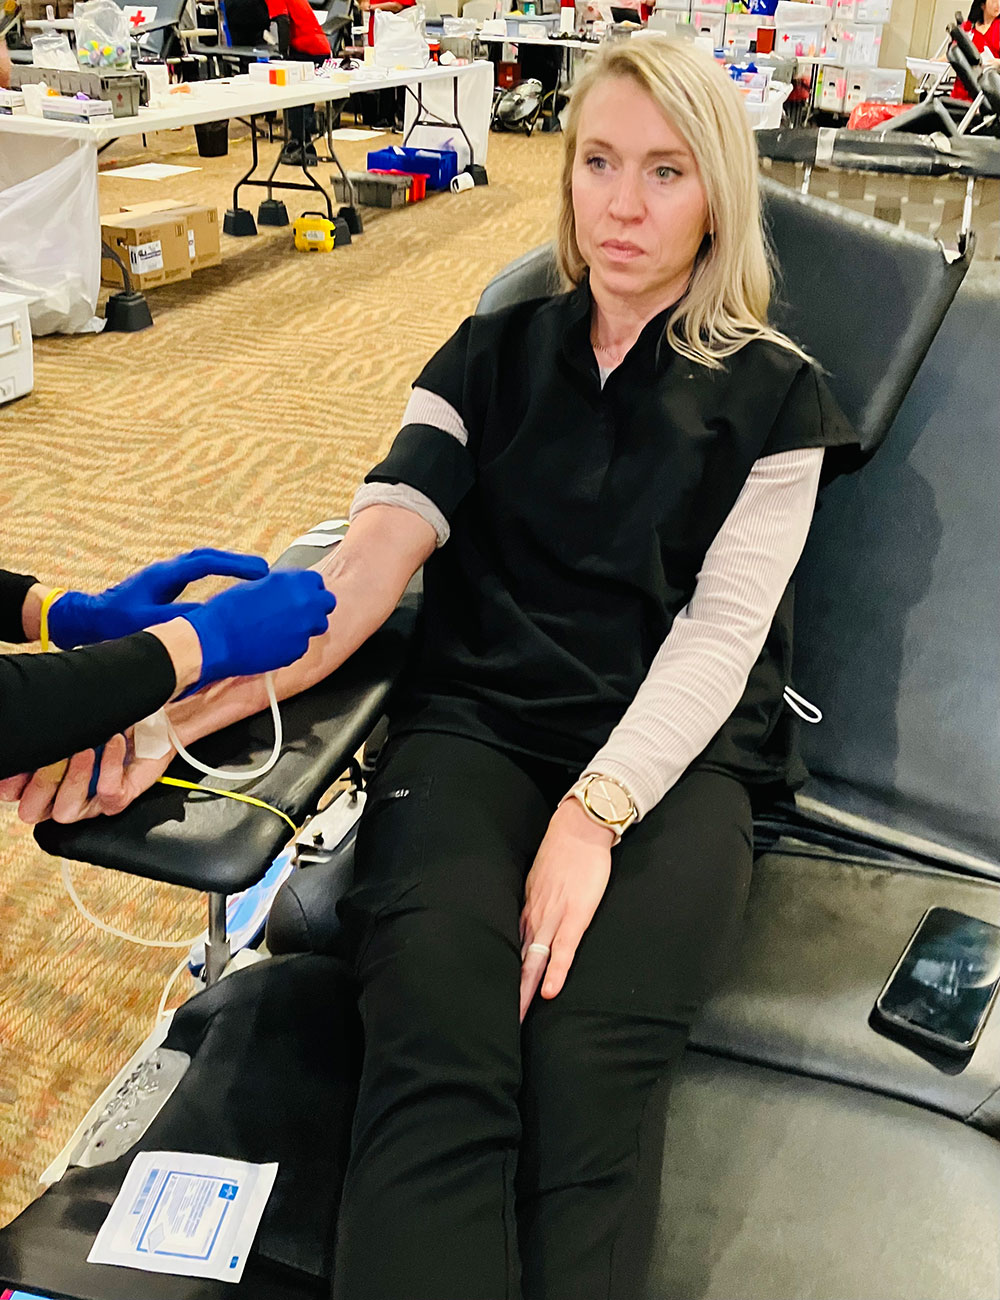 Joanne Roberts giving blood